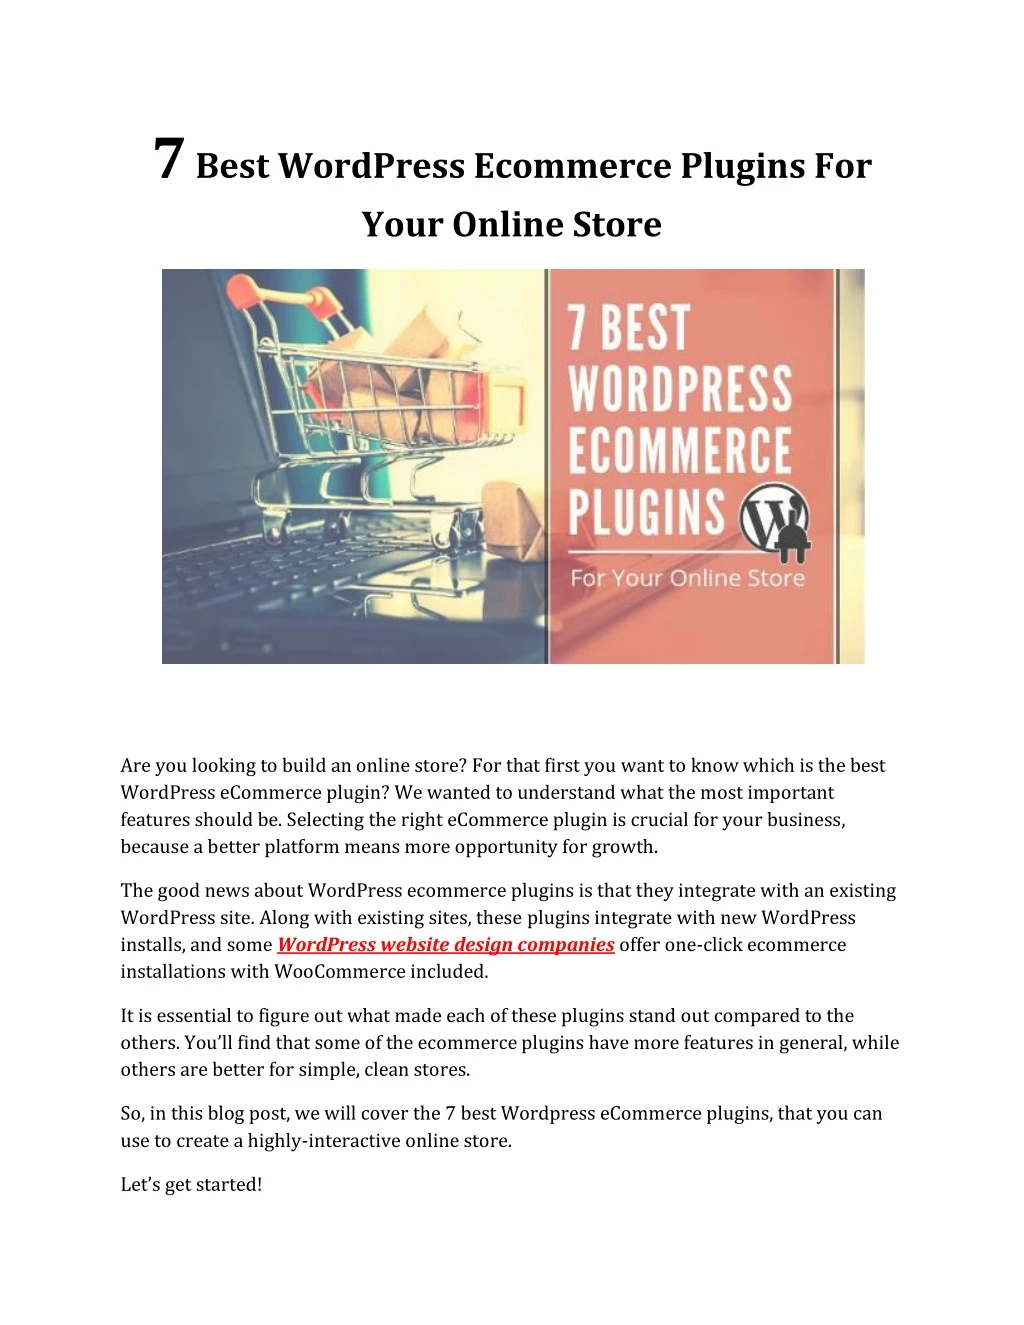 7 best wordpress ecommerce plugins for your